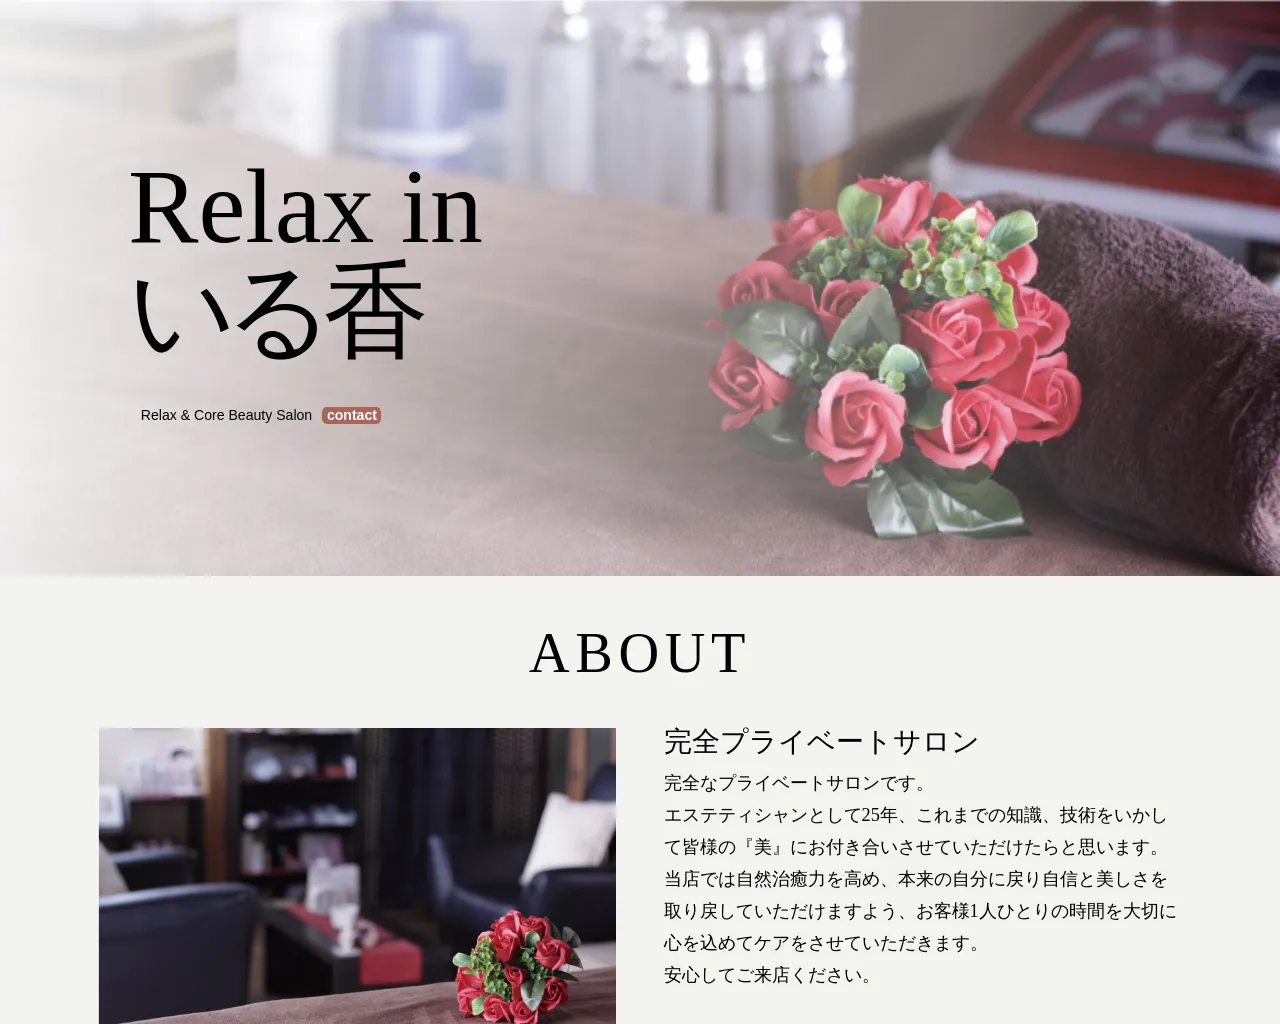 Relax in いる香/トータルエステサロン/滋賀県/膳所/ハーブ/体質改善/脱毛/介護脱毛/エステ site